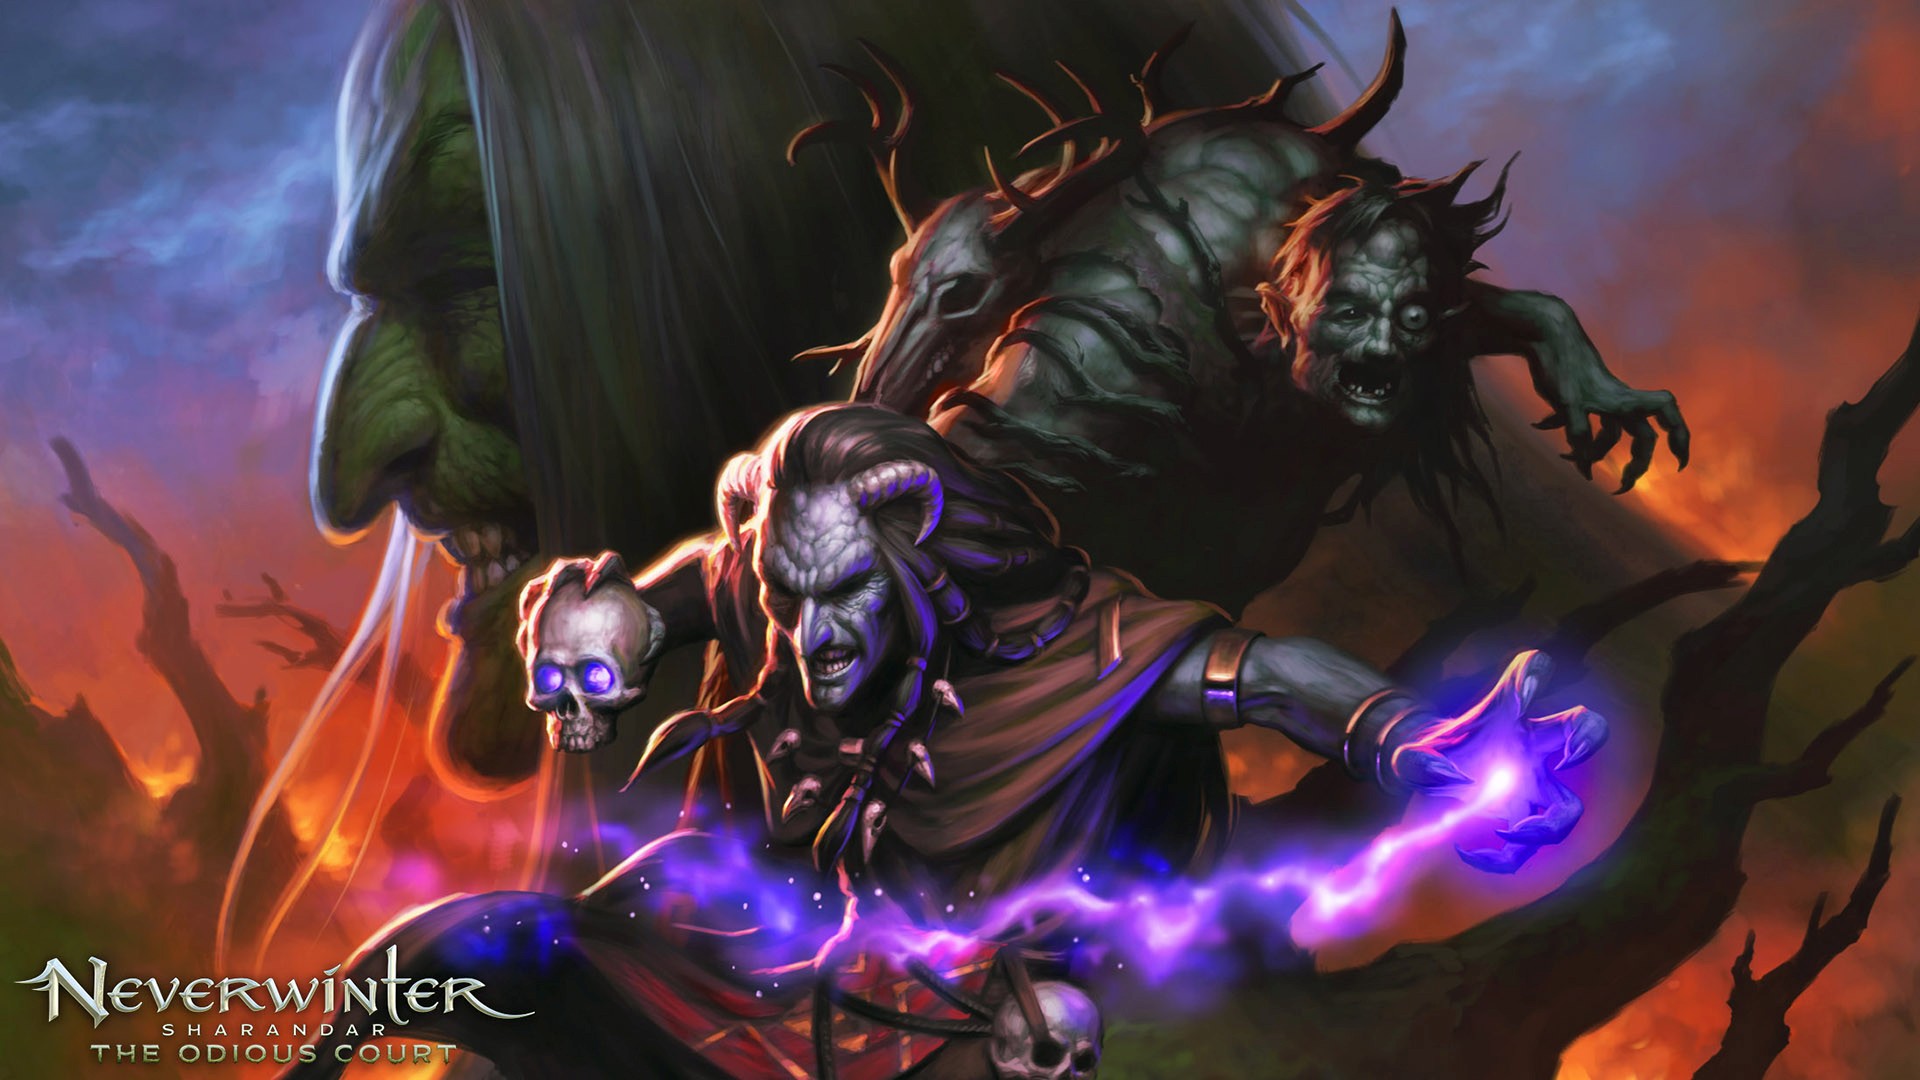 Video For Neverwinter Sharandar Episode 3: The Odious Court is Available Now